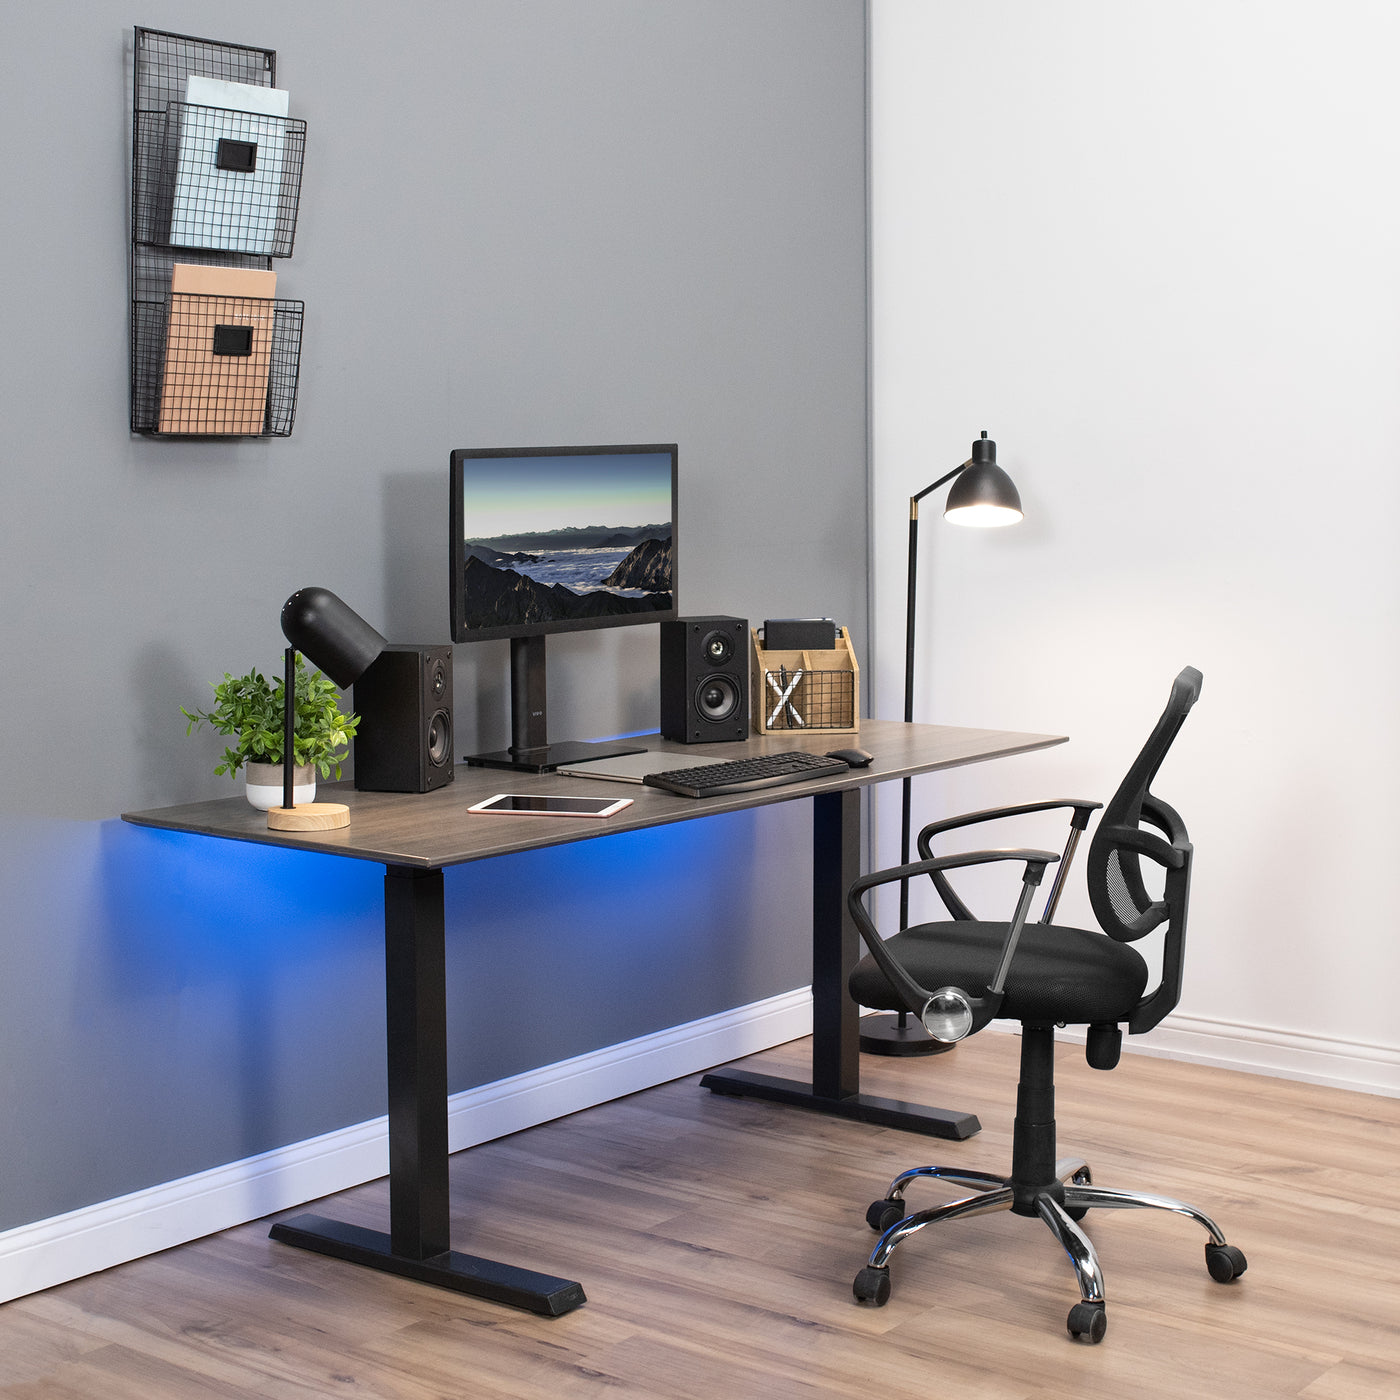 Single Monitor and TV Desk Stand